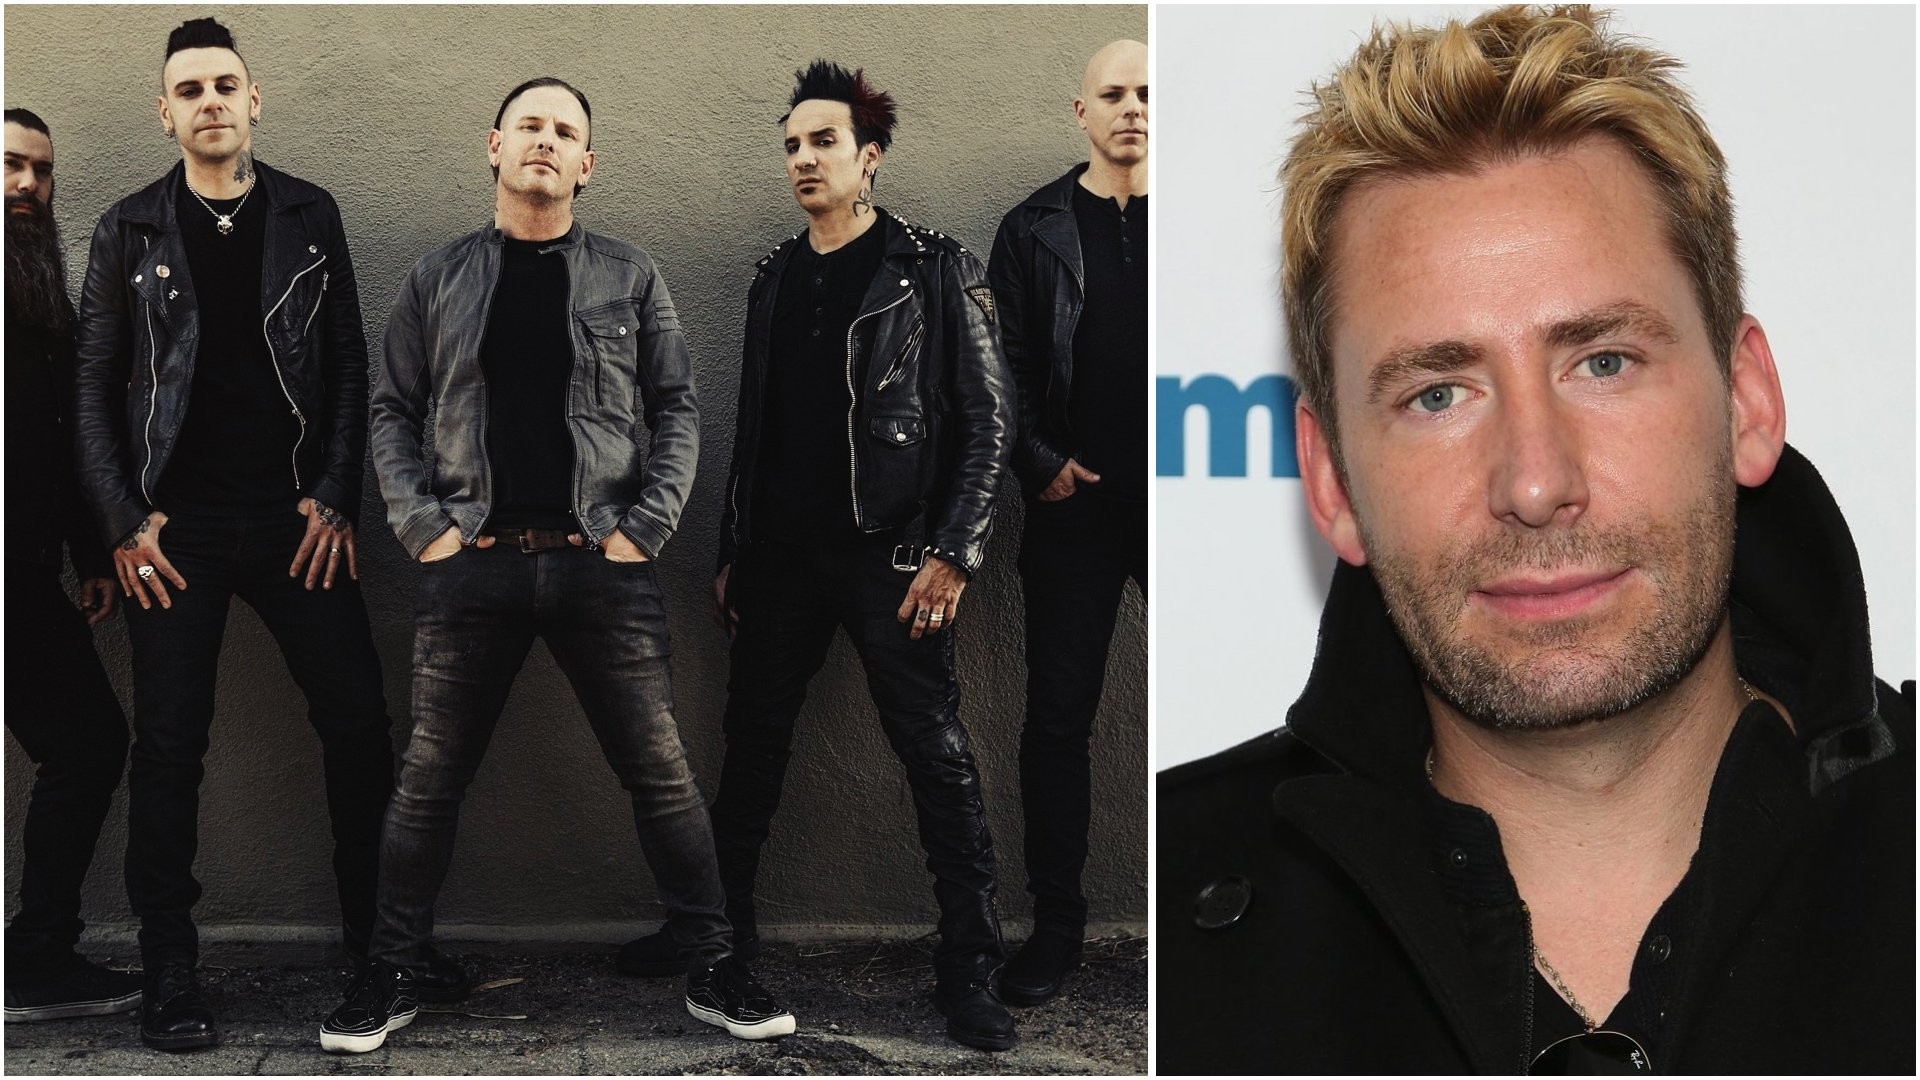 1920x1080 Stone Sour Guitarist Responds To Chad Kroeger's "Nickelback Lite" Diss -  Music Feeds